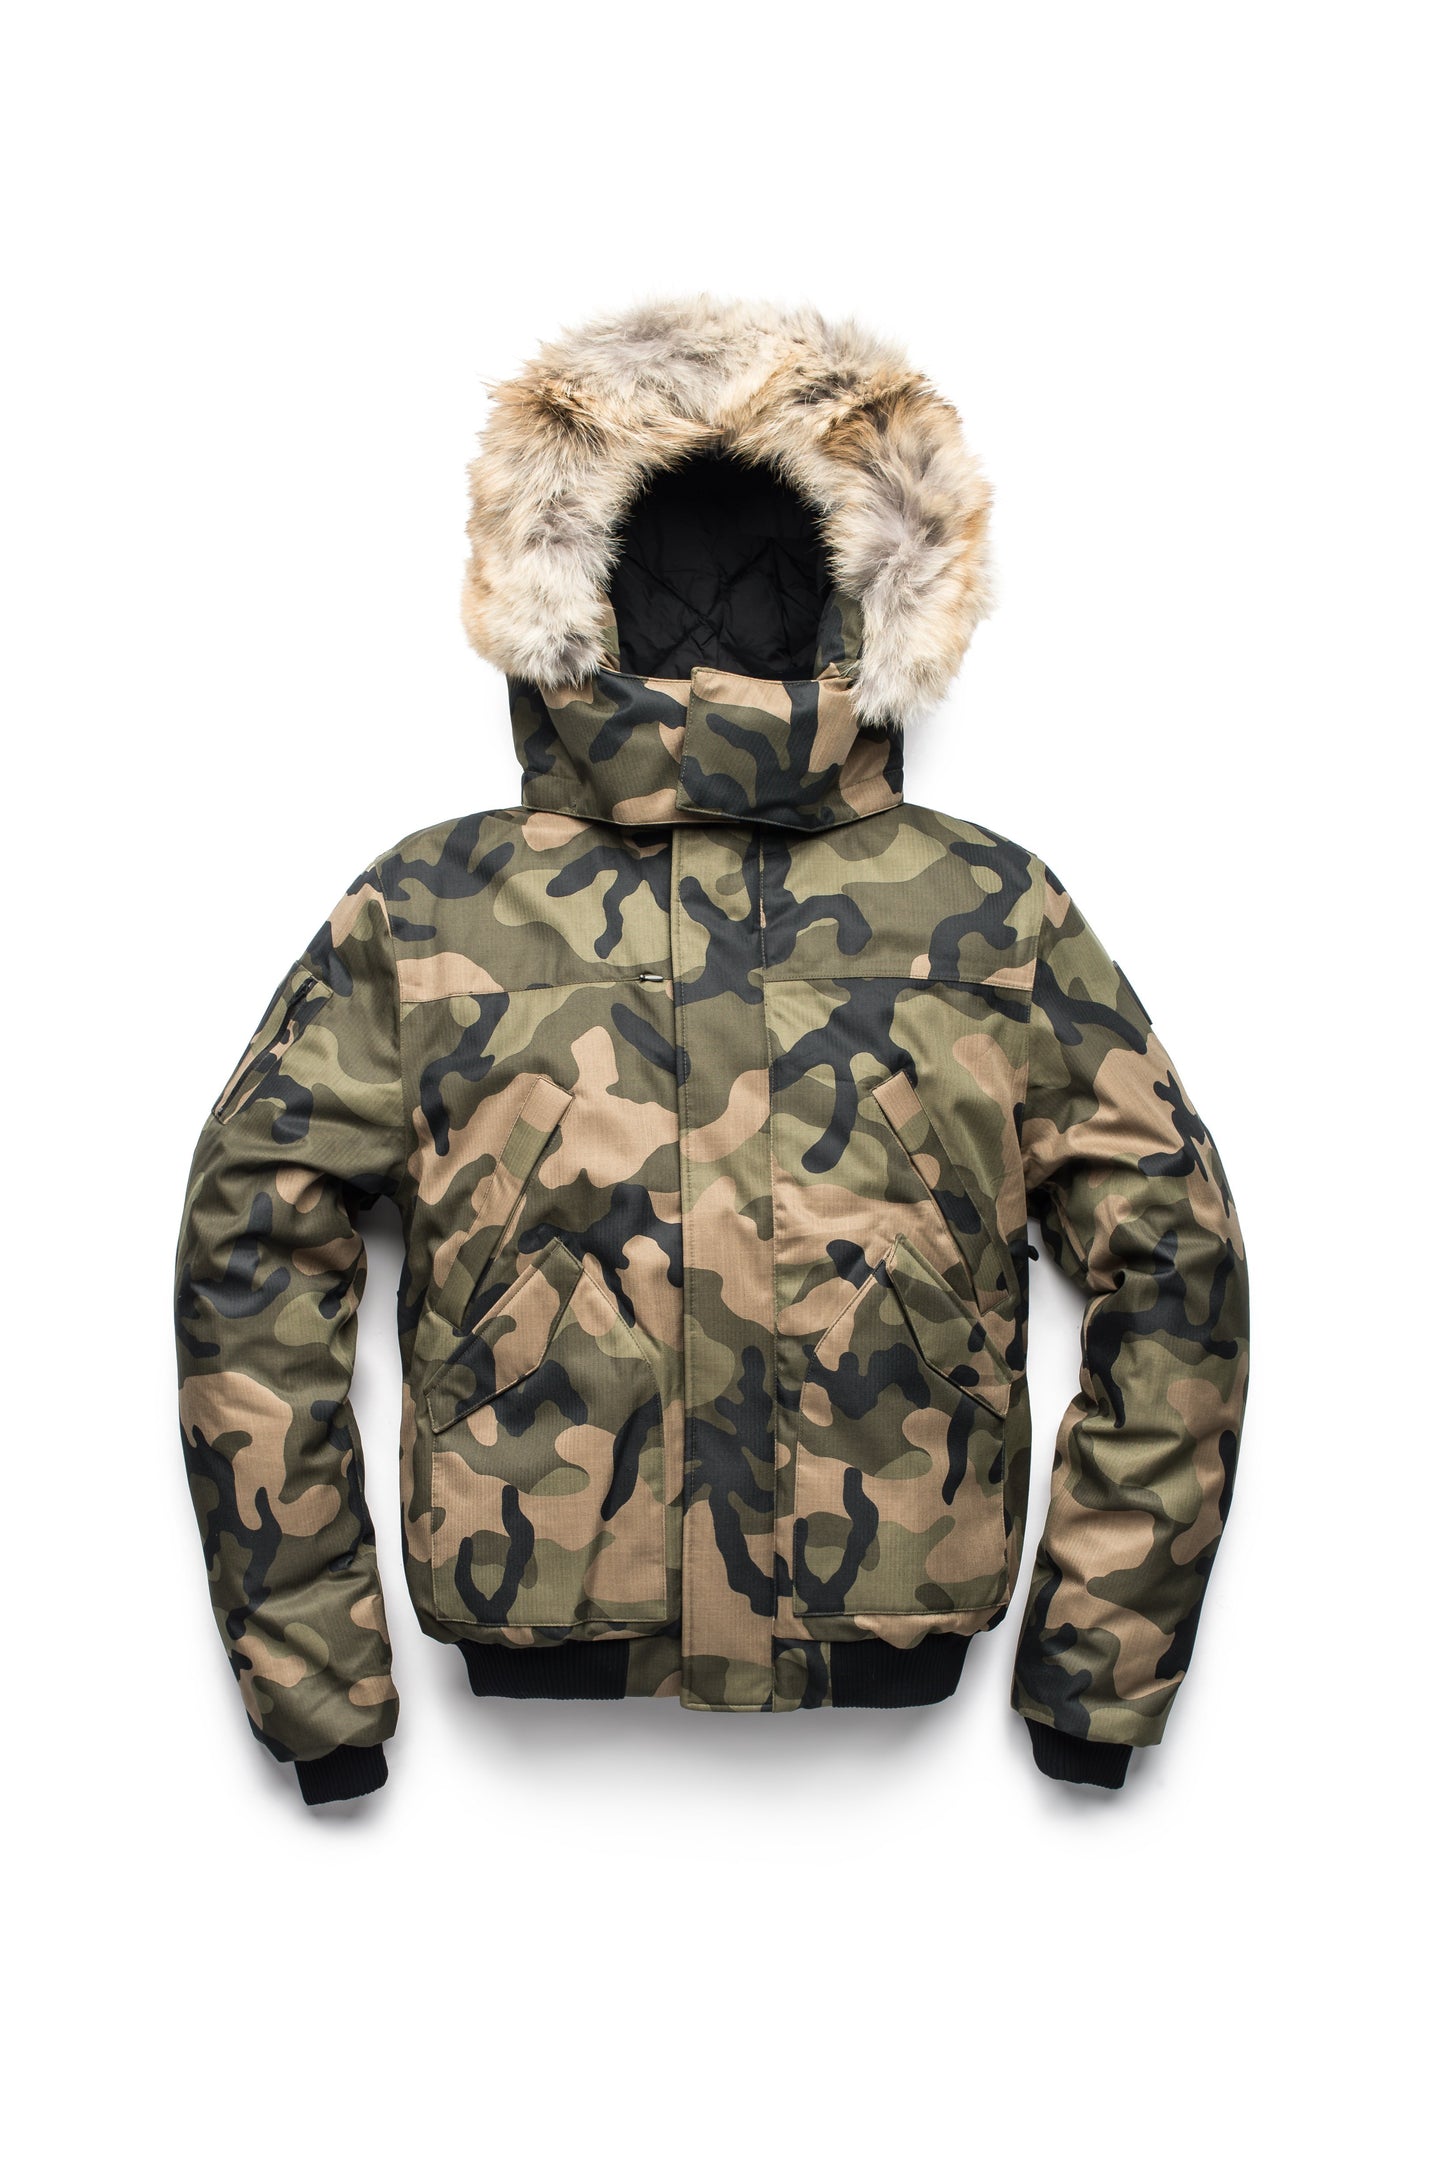 Men's classic down filled bomber jacket with a down filledÃƒâ€šÃ‚Â hood that features a removable coyote fur trim and concealed moldable framing wire in Camo